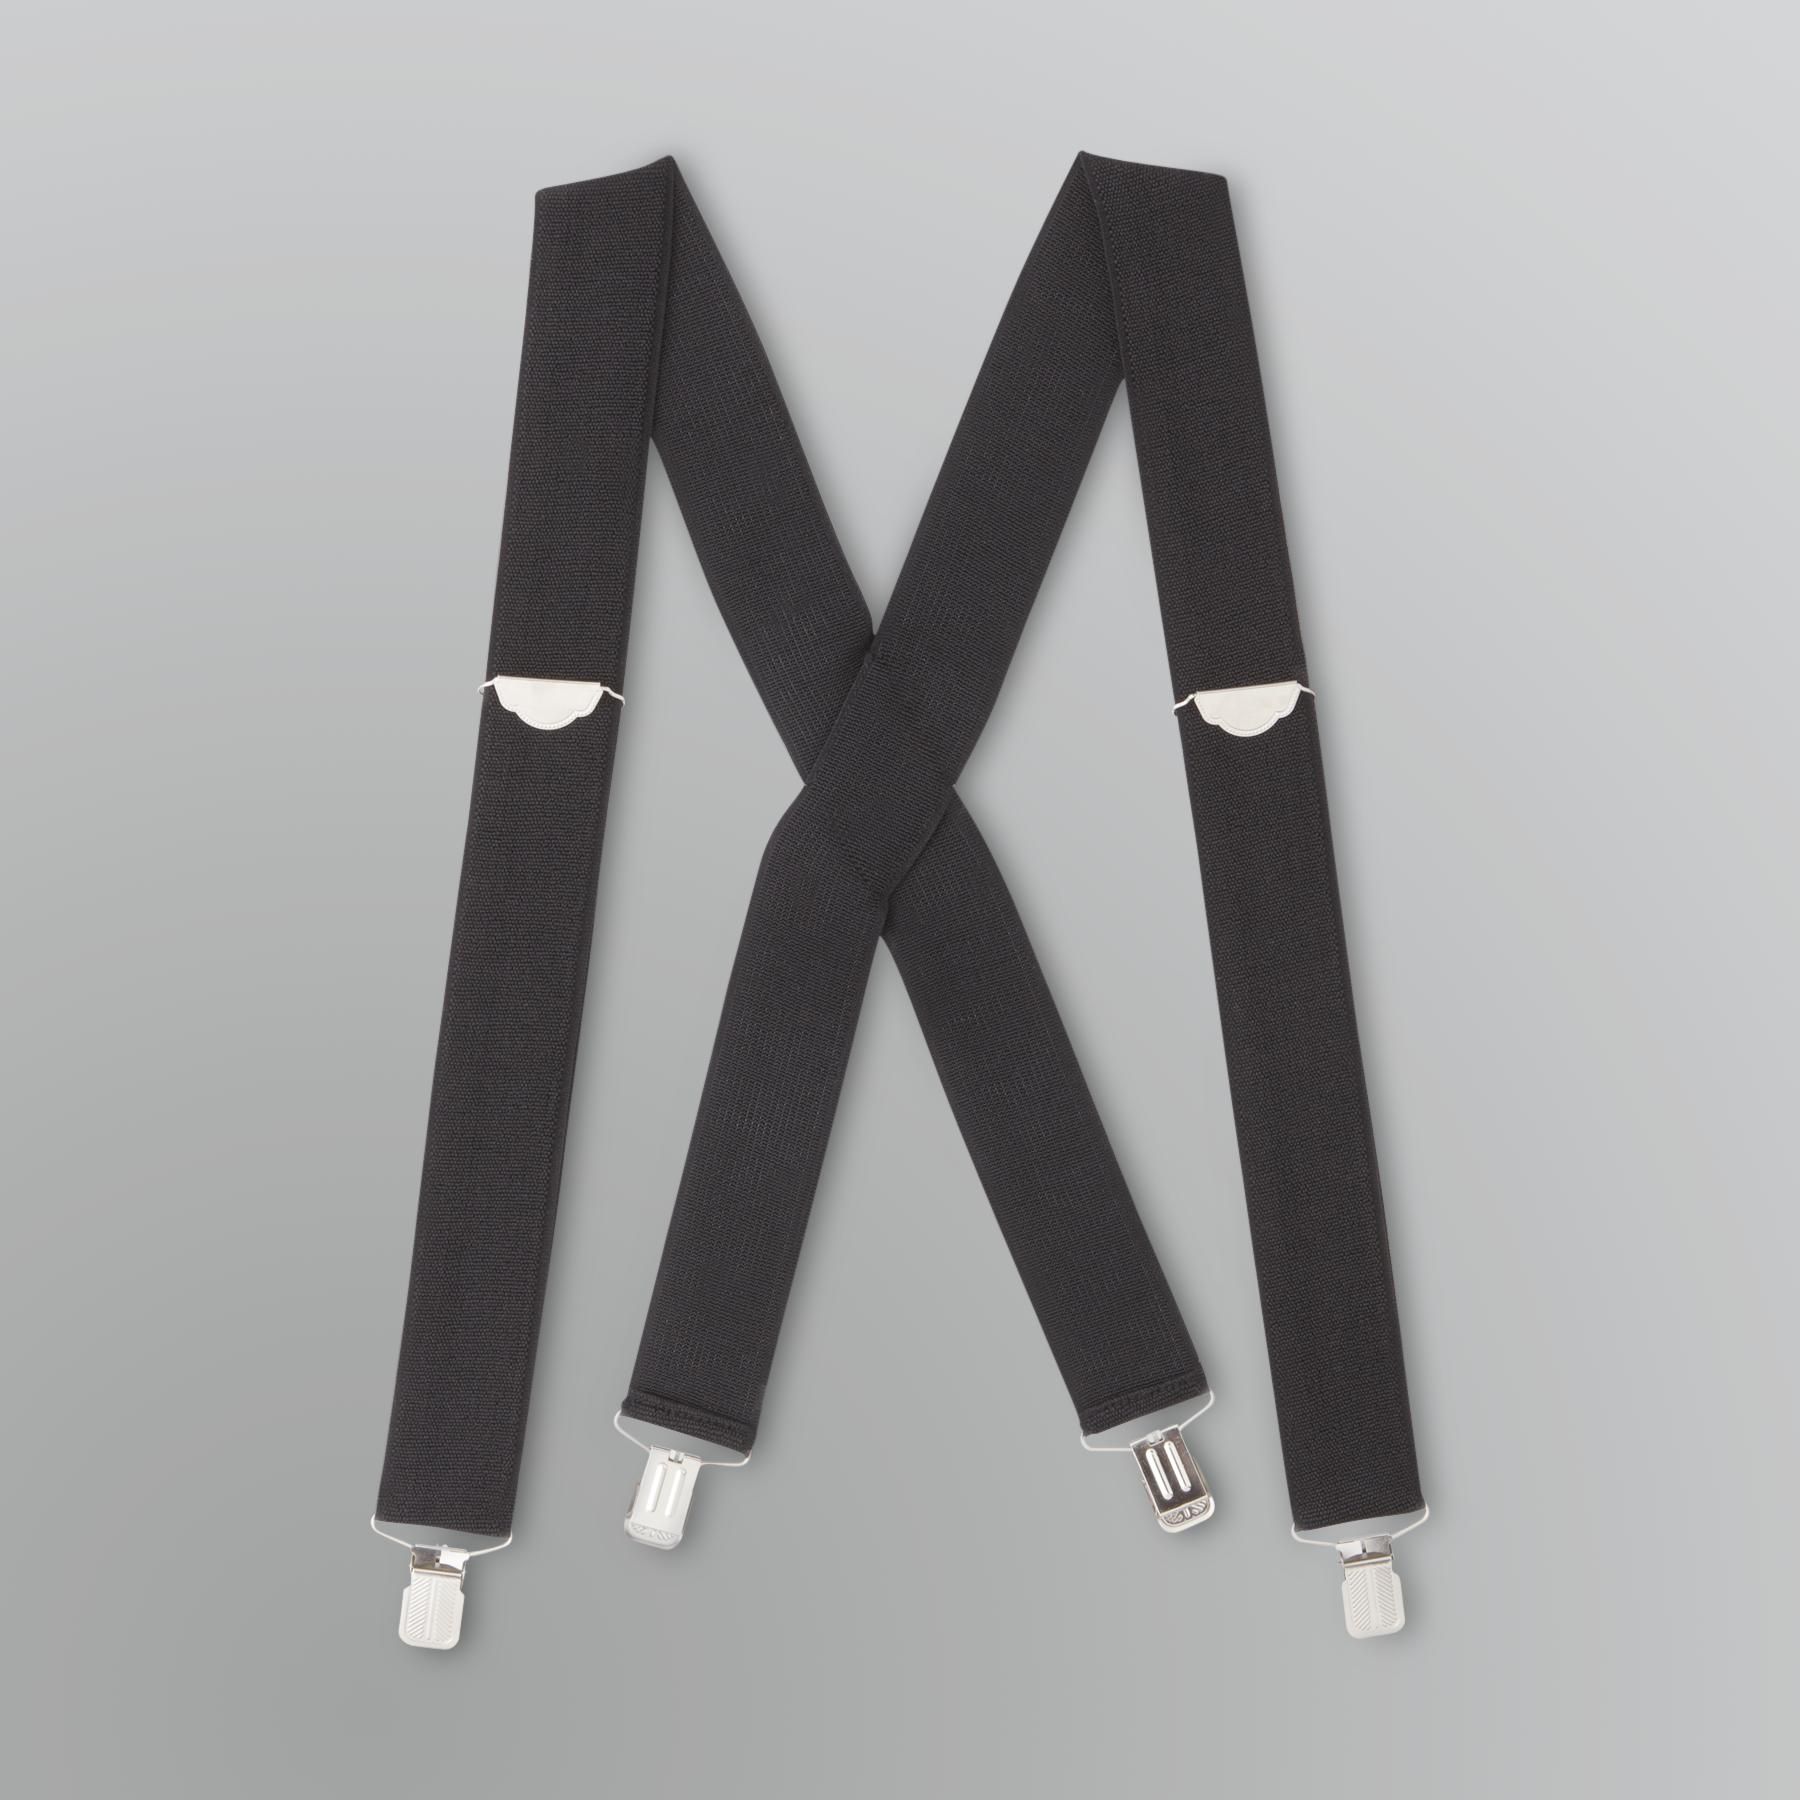 Basic Editions Men's Big and Tall Suspenders